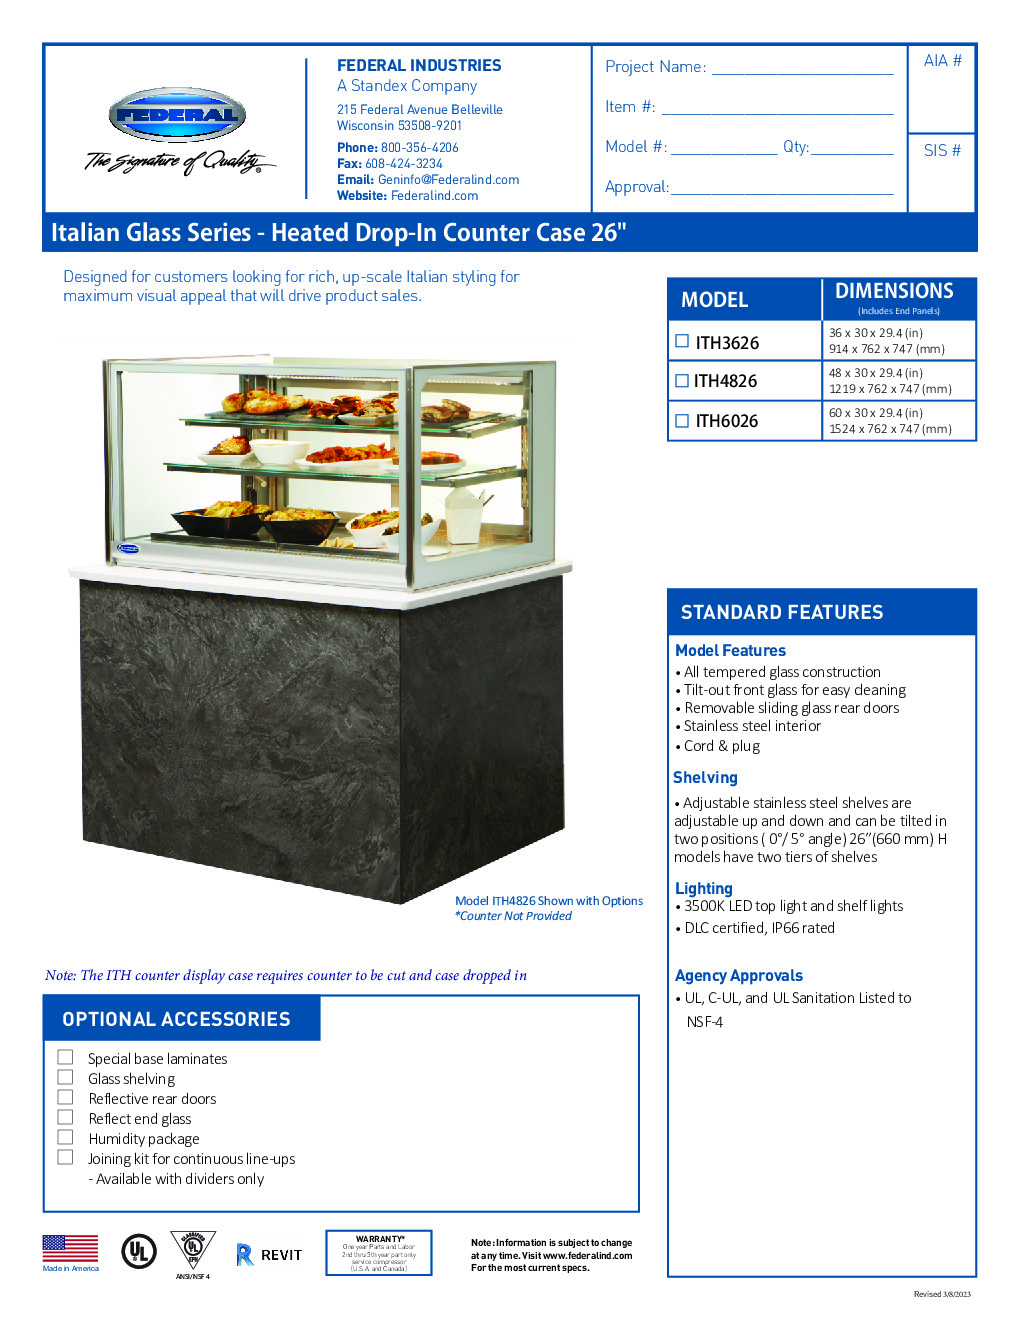 Federal Industries ITH6026 Drop-In Heated Display Case